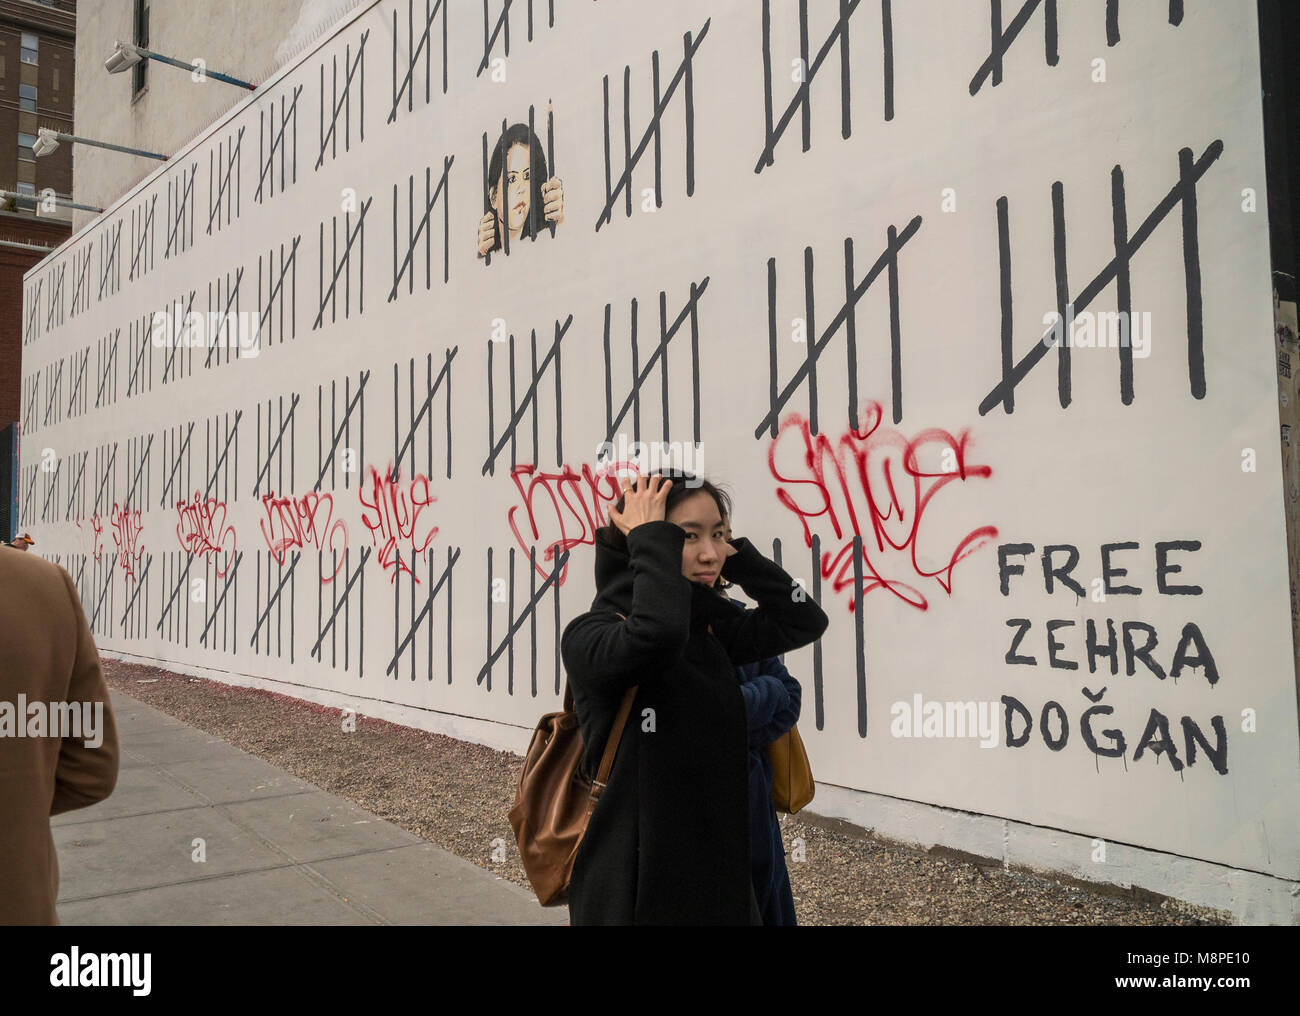 Street art enthusiasts flock to the 'Bowery Wall on Houston Street in New York on Saturday, March 17, 2018 to view and photograph artist Banksy's collaboration with the street artist Borf. The work is a tribute to the jailed Turkish Kurdish artist Zehra Dogan who was arrested for painting a work featuring a Kurdish town in ruins after a conflict between the army and Kurdish rebels.  Banksy's work previously appeared in New York on October 2013 when he created a work a day during his one month 'residency'. (© Richard B. Levine) Stock Photo